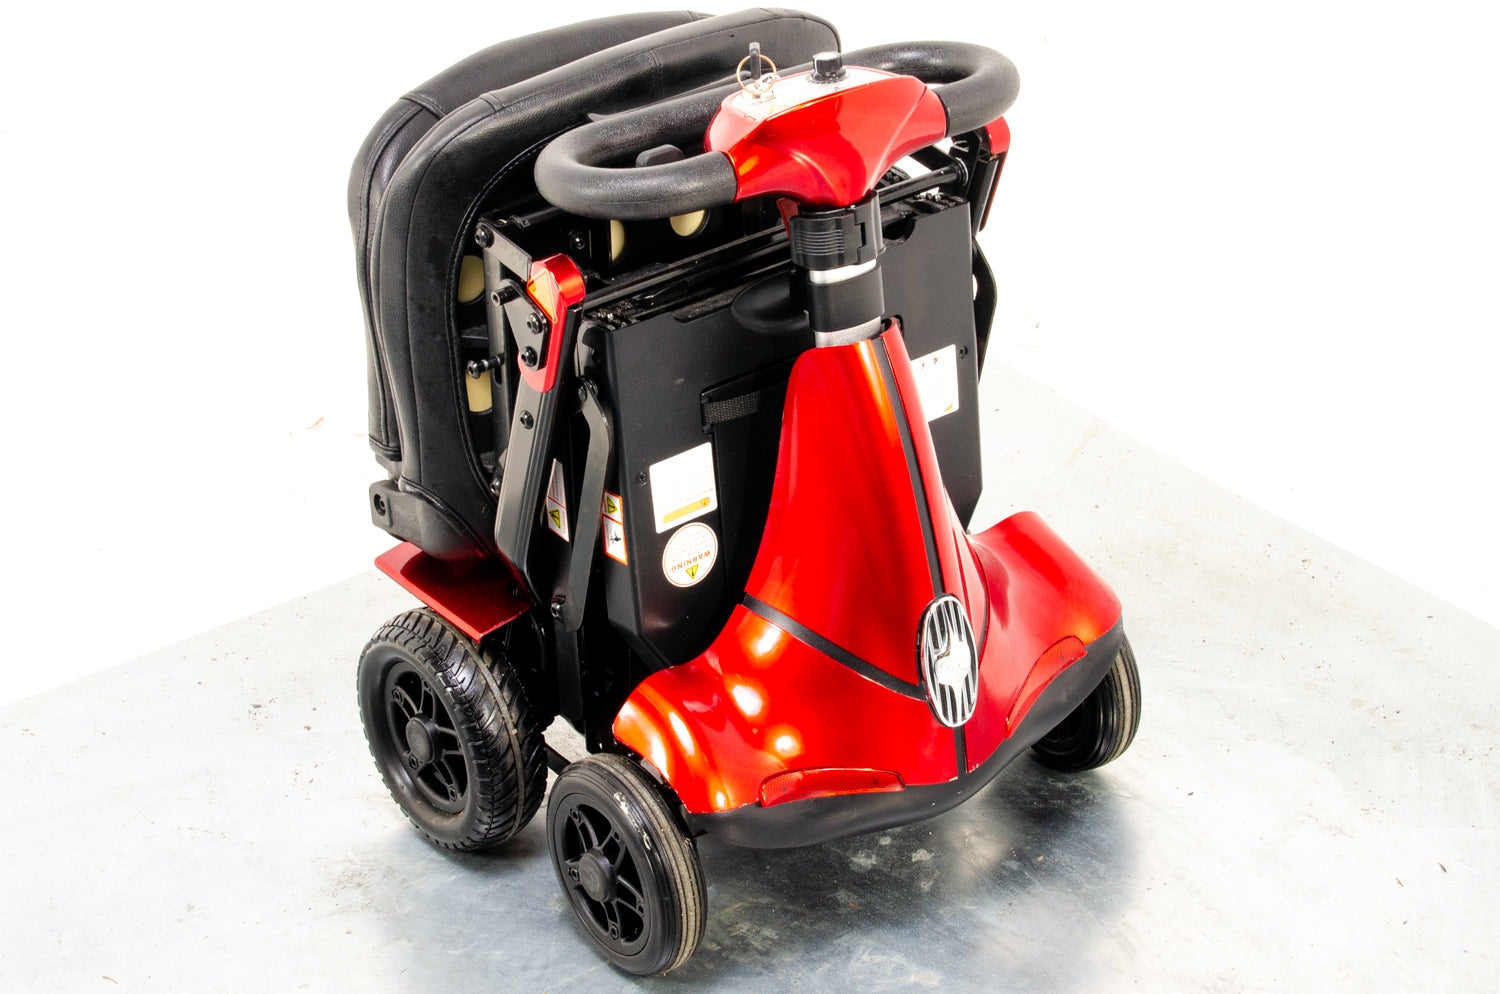 Monarch Mobie 4mph Folding Used Mobility Scooter Lithium Travel Small Travel Red 13334